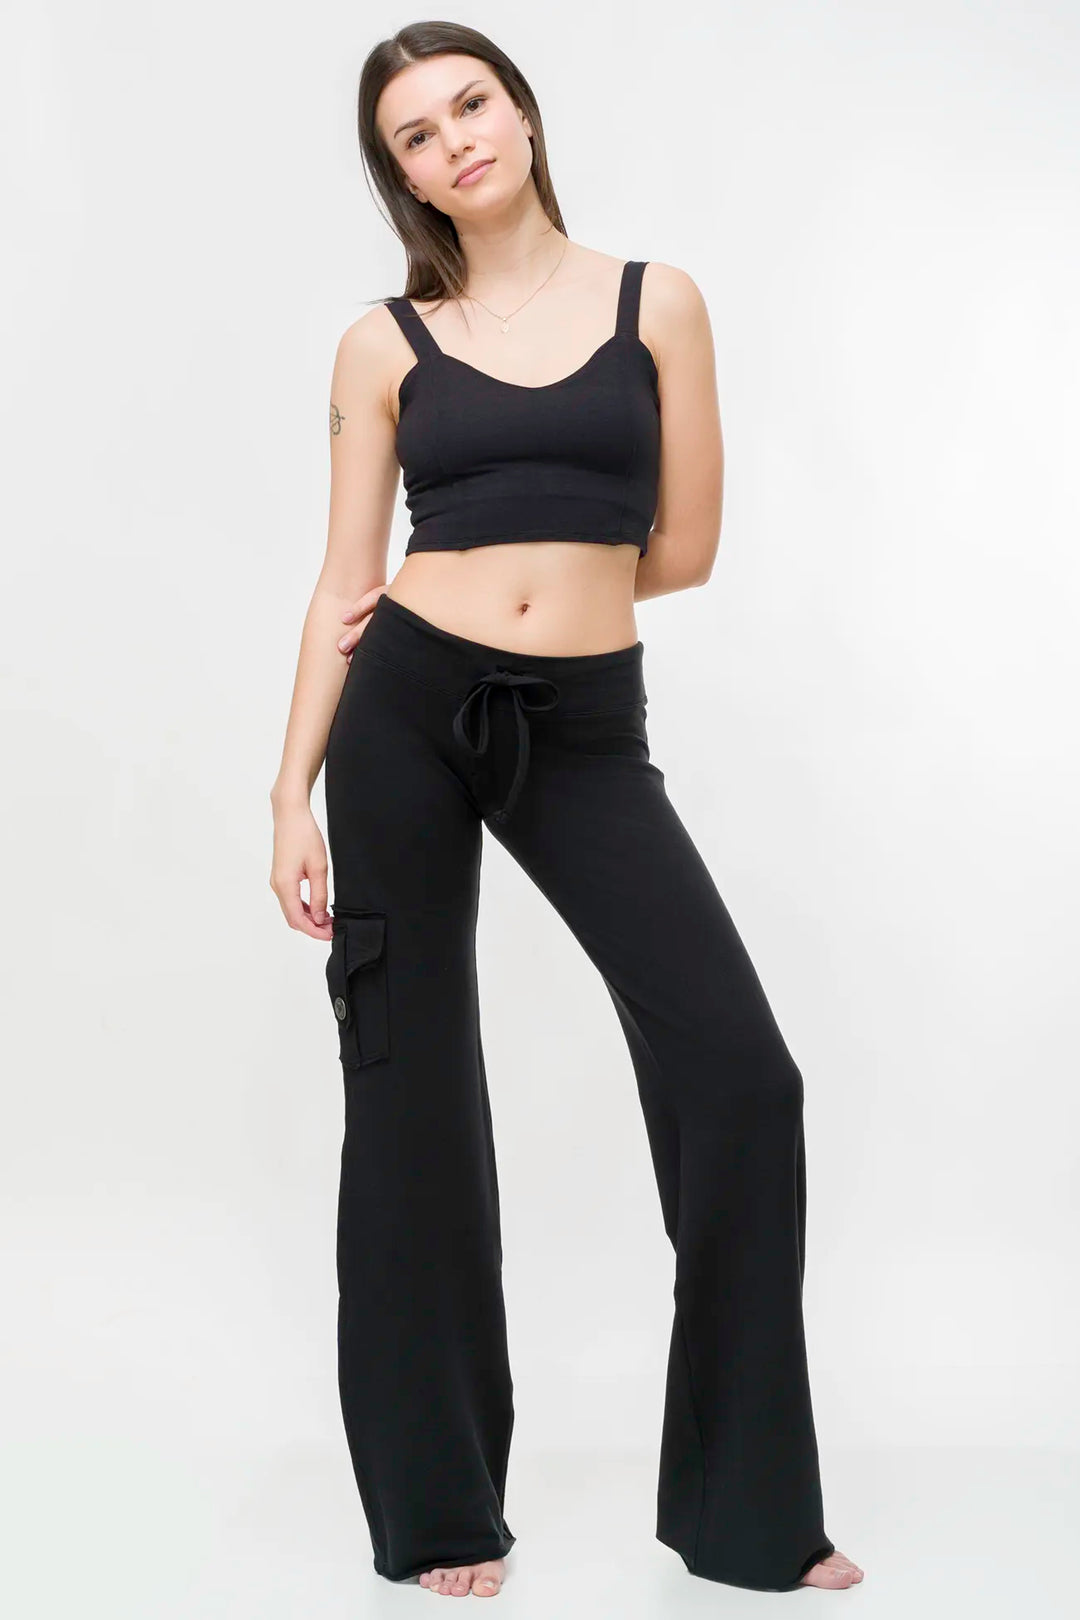 Black yoga pant outfit with pockets and bamboo bra